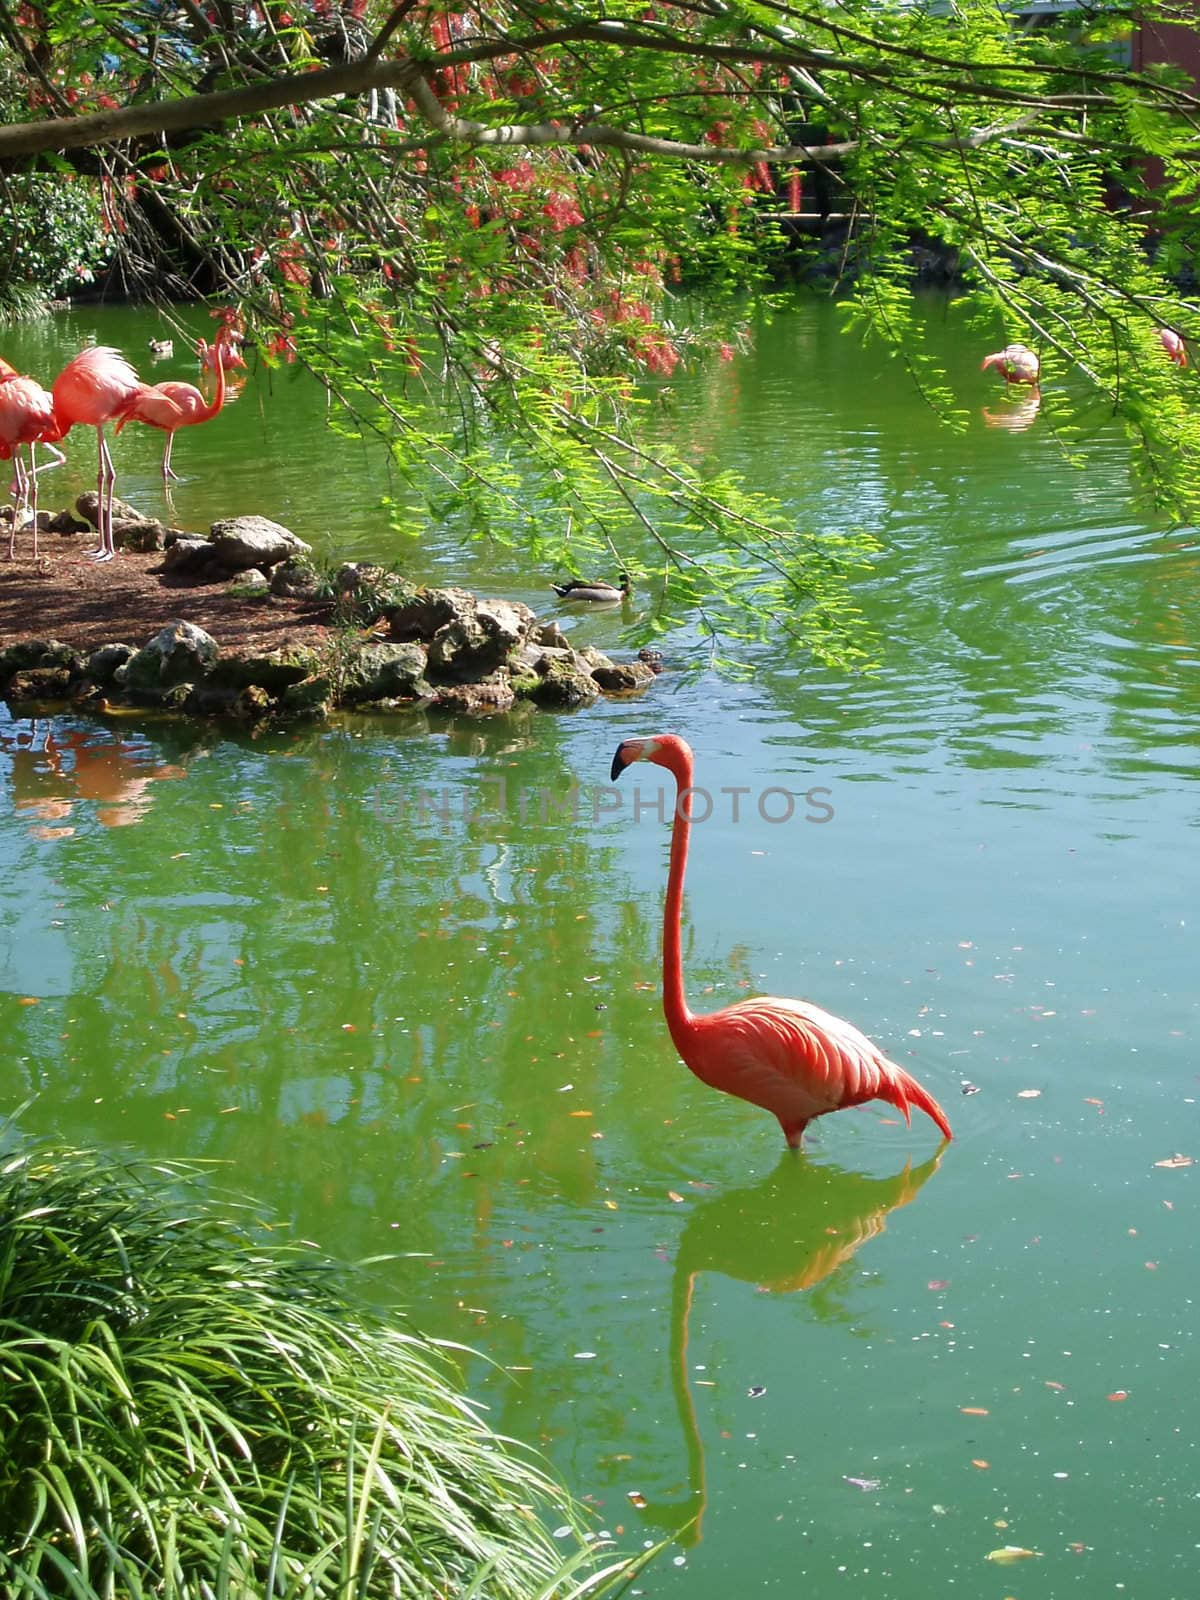 A flamingo standing in the water with reflection